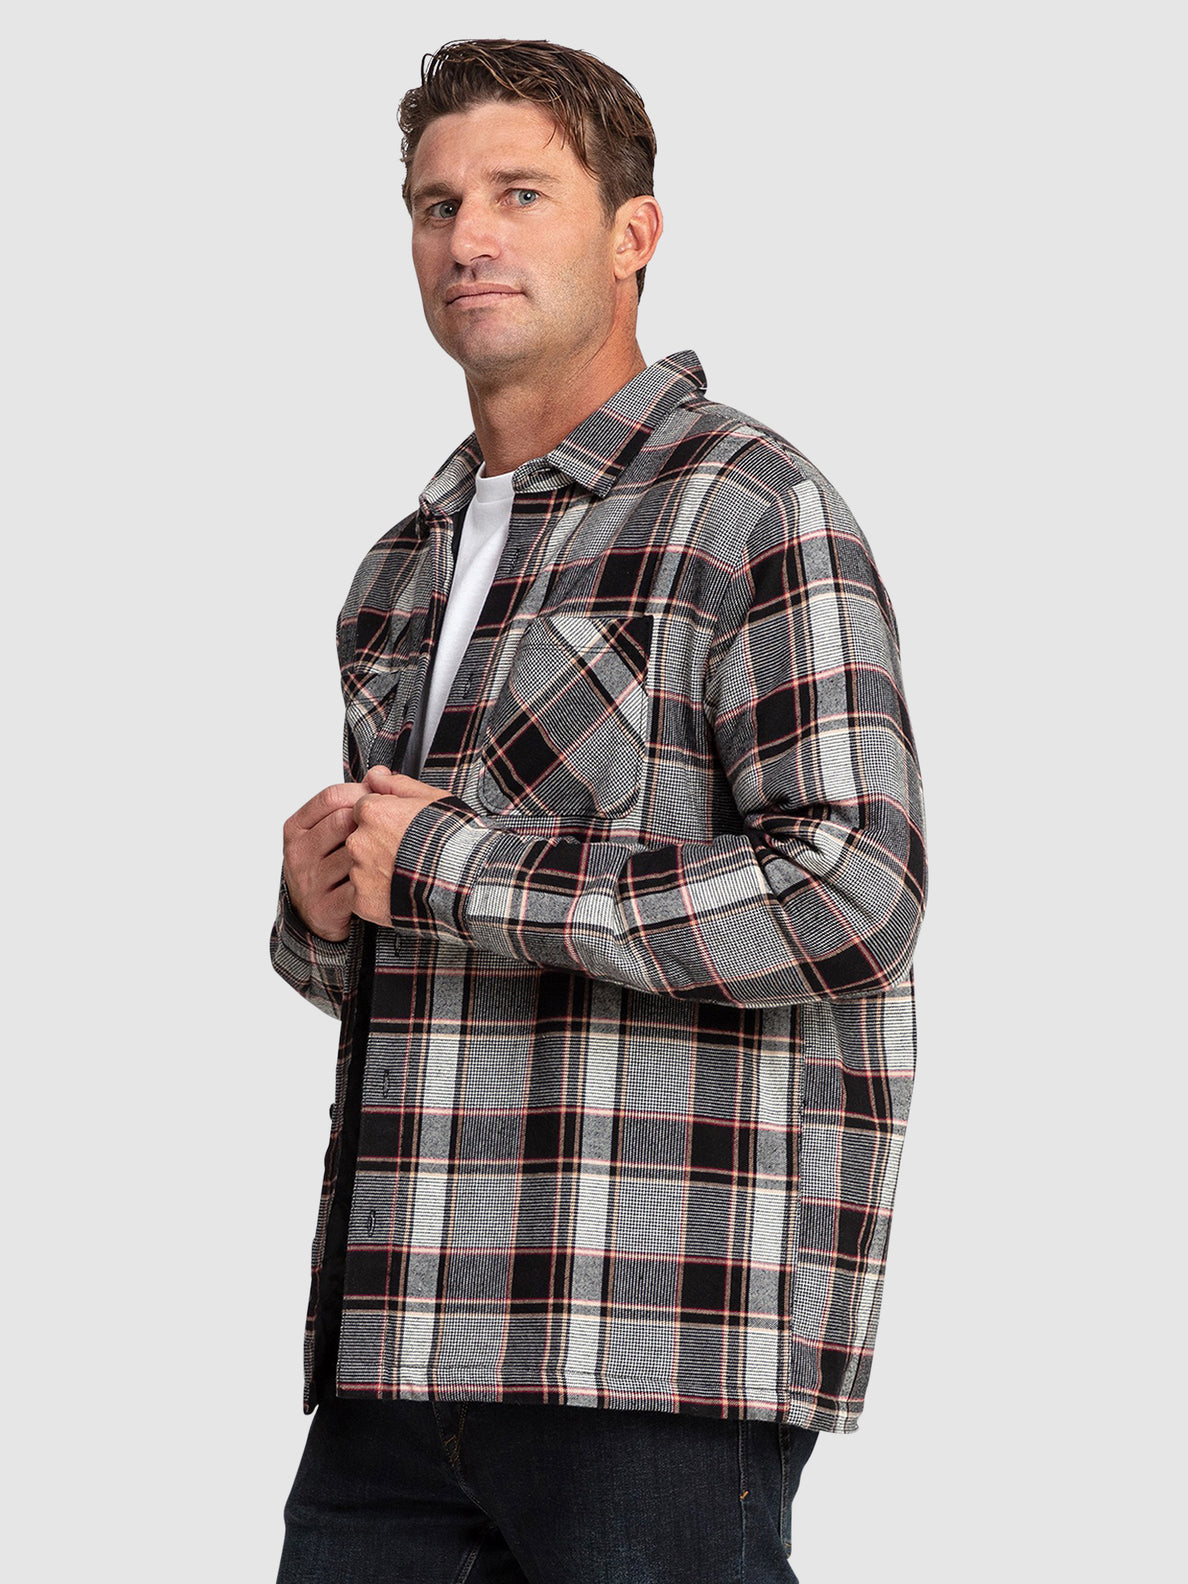 Brickstone Lined Flannel Long Sleeve Shirt - Dirty White